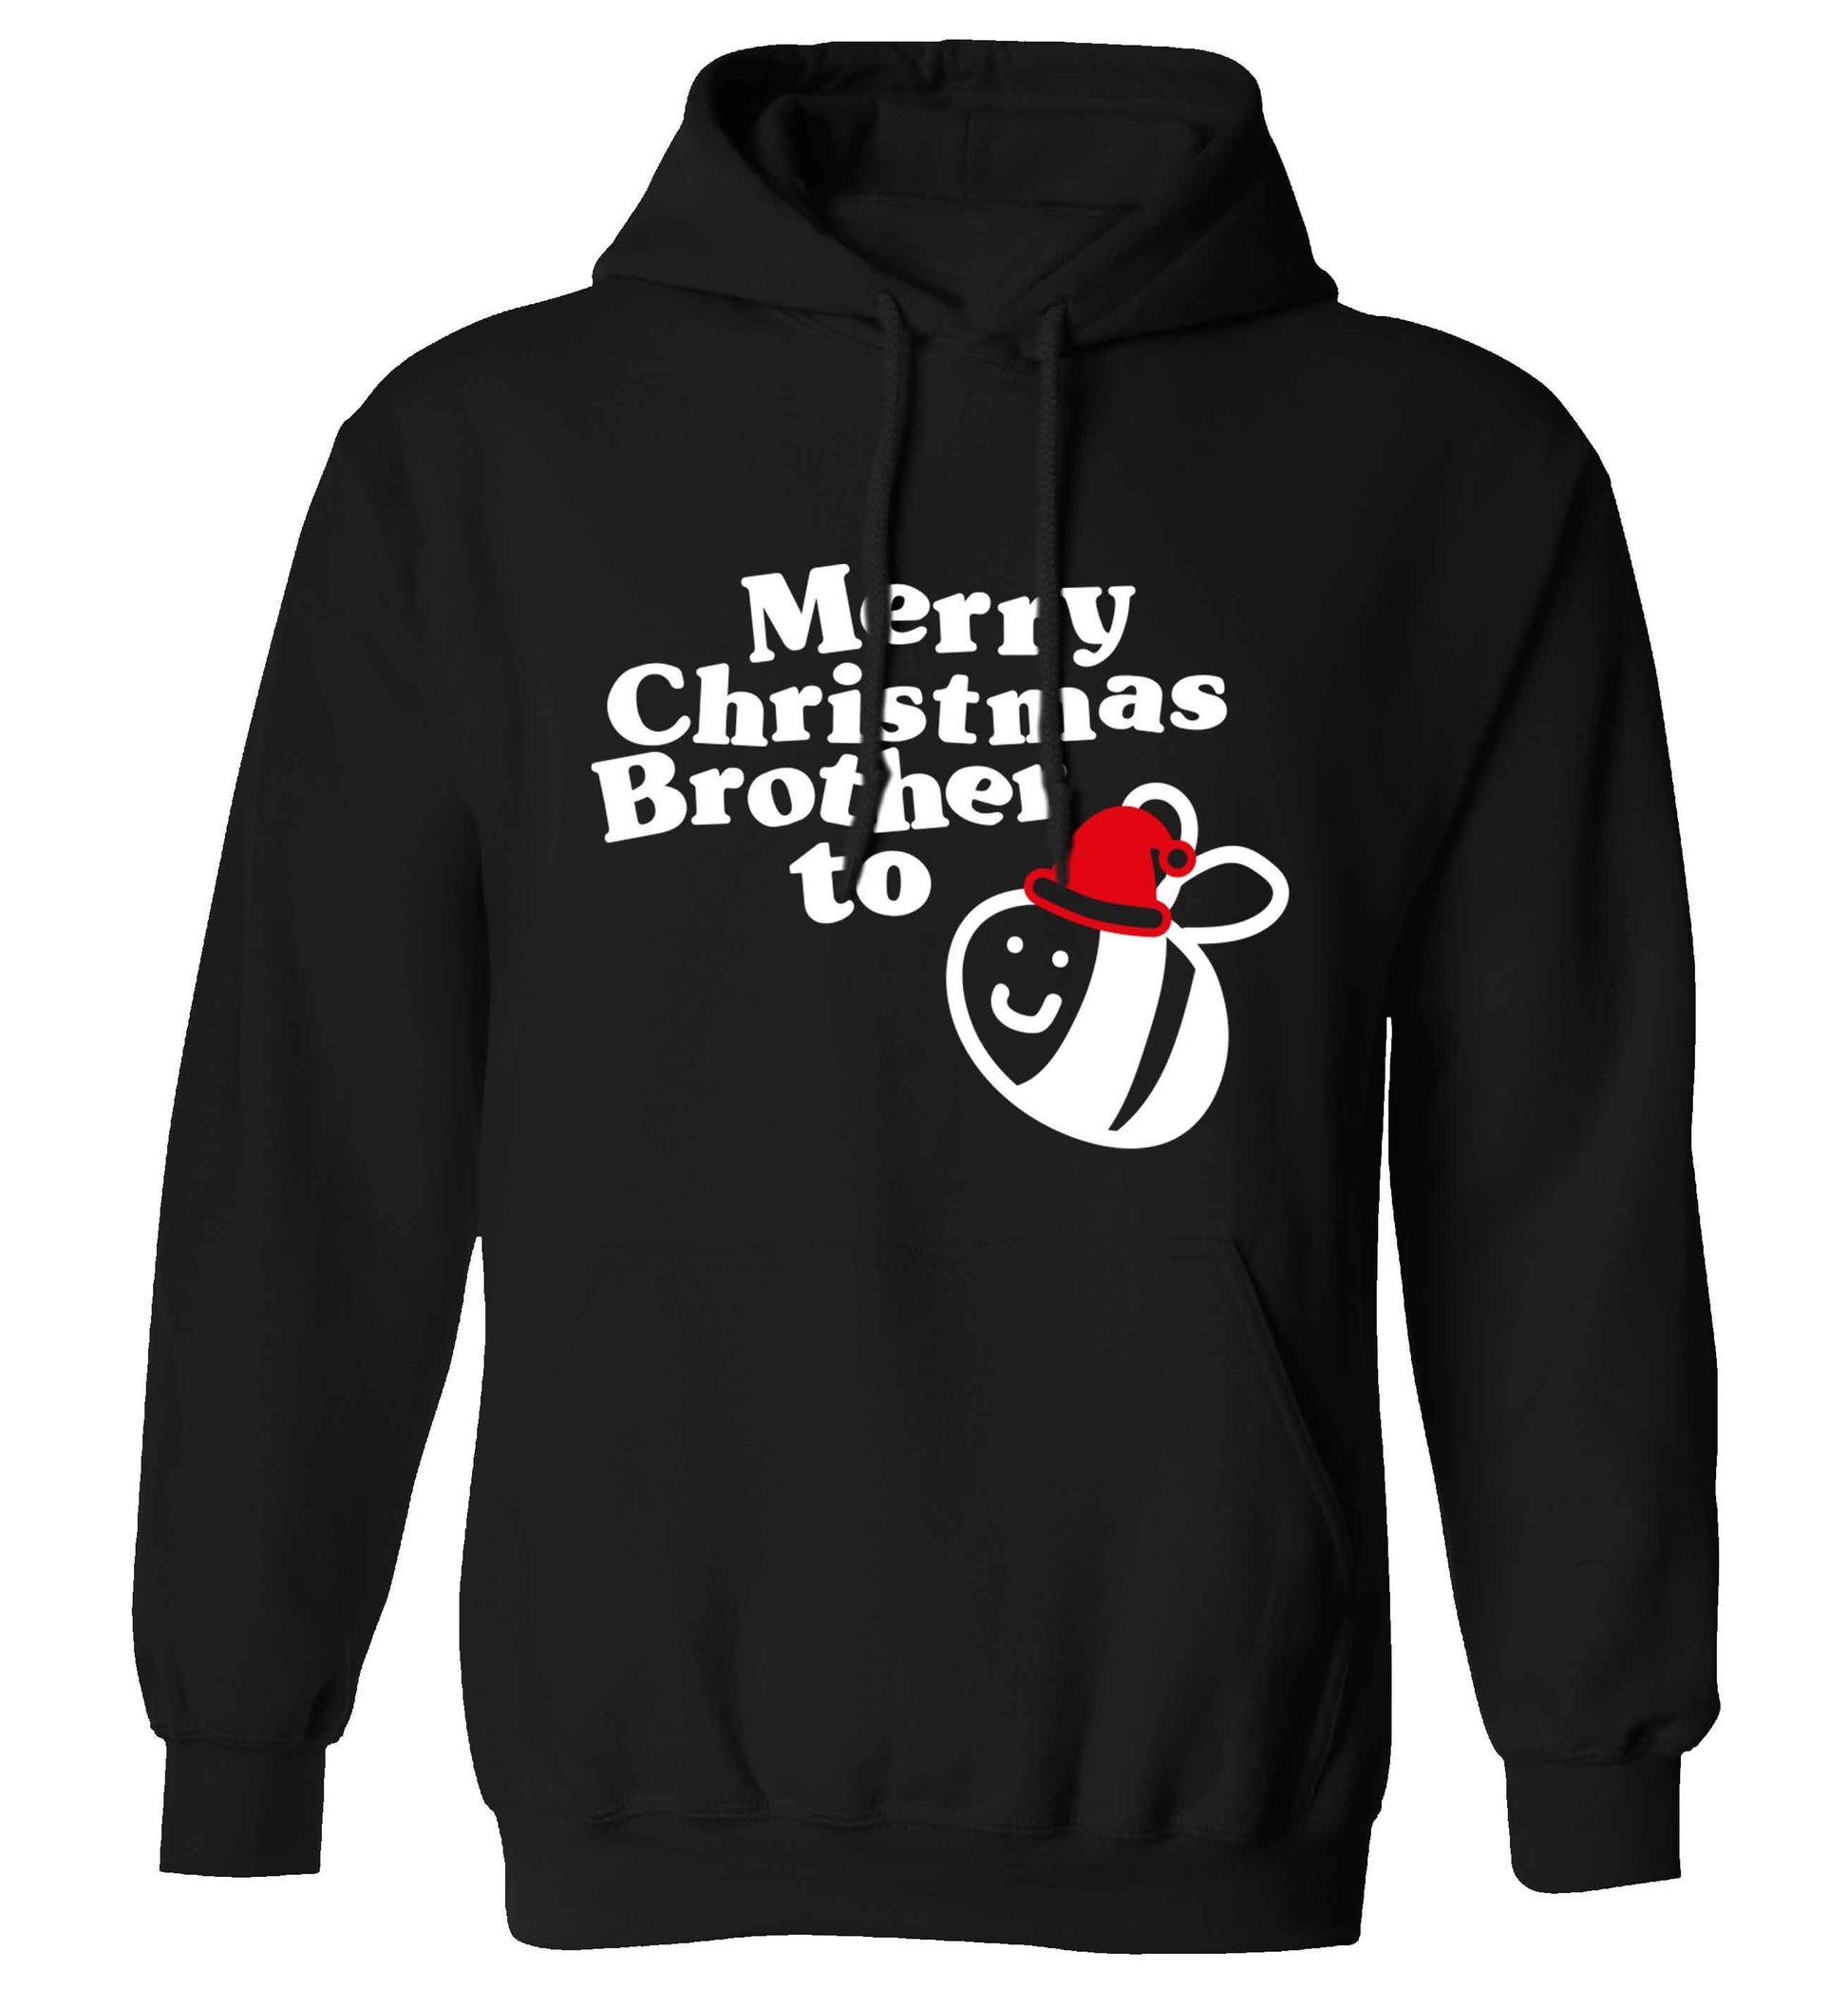 Merry Christmas brother to be adults unisex black hoodie 2XL